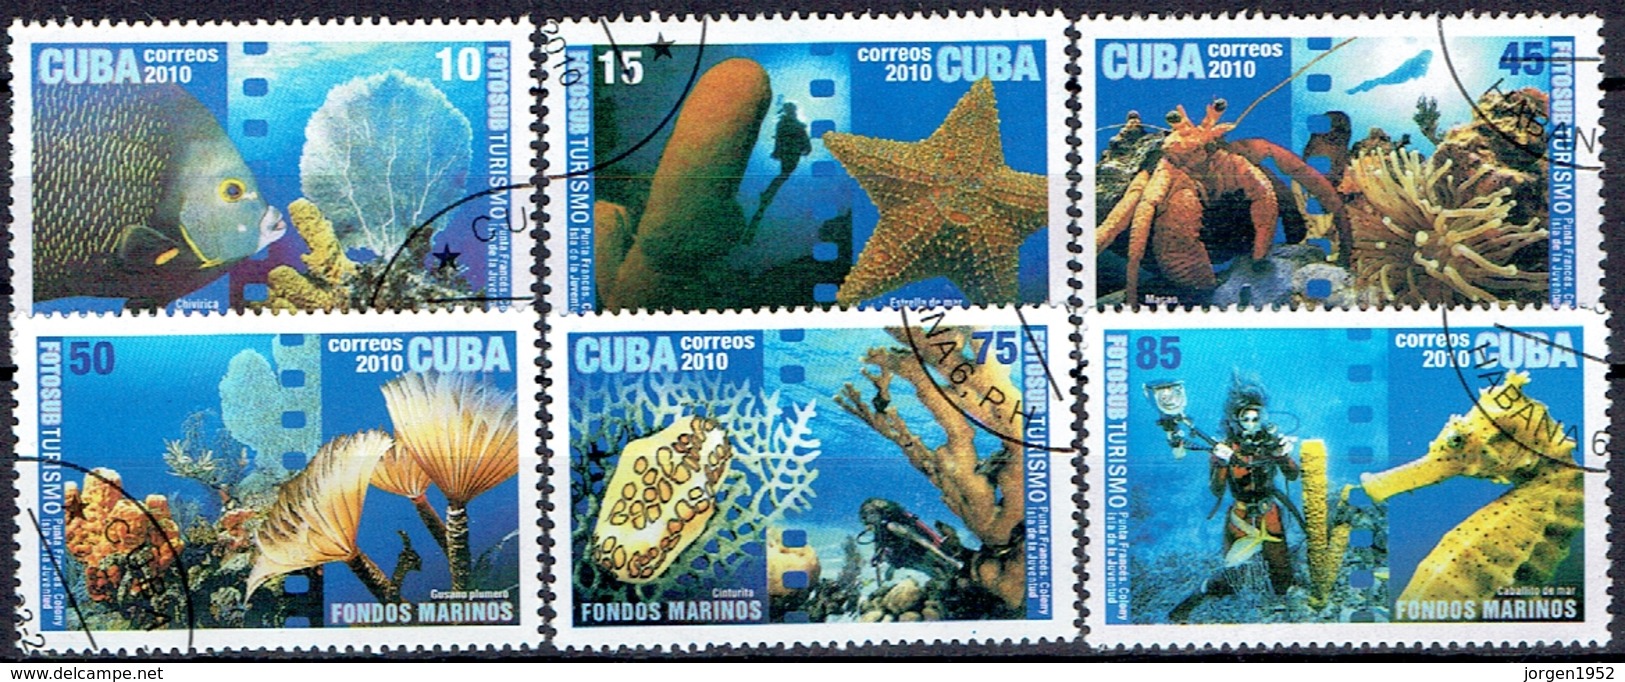 CUBA # FROM 2010 STAMPWORLD 5370-75 - Used Stamps